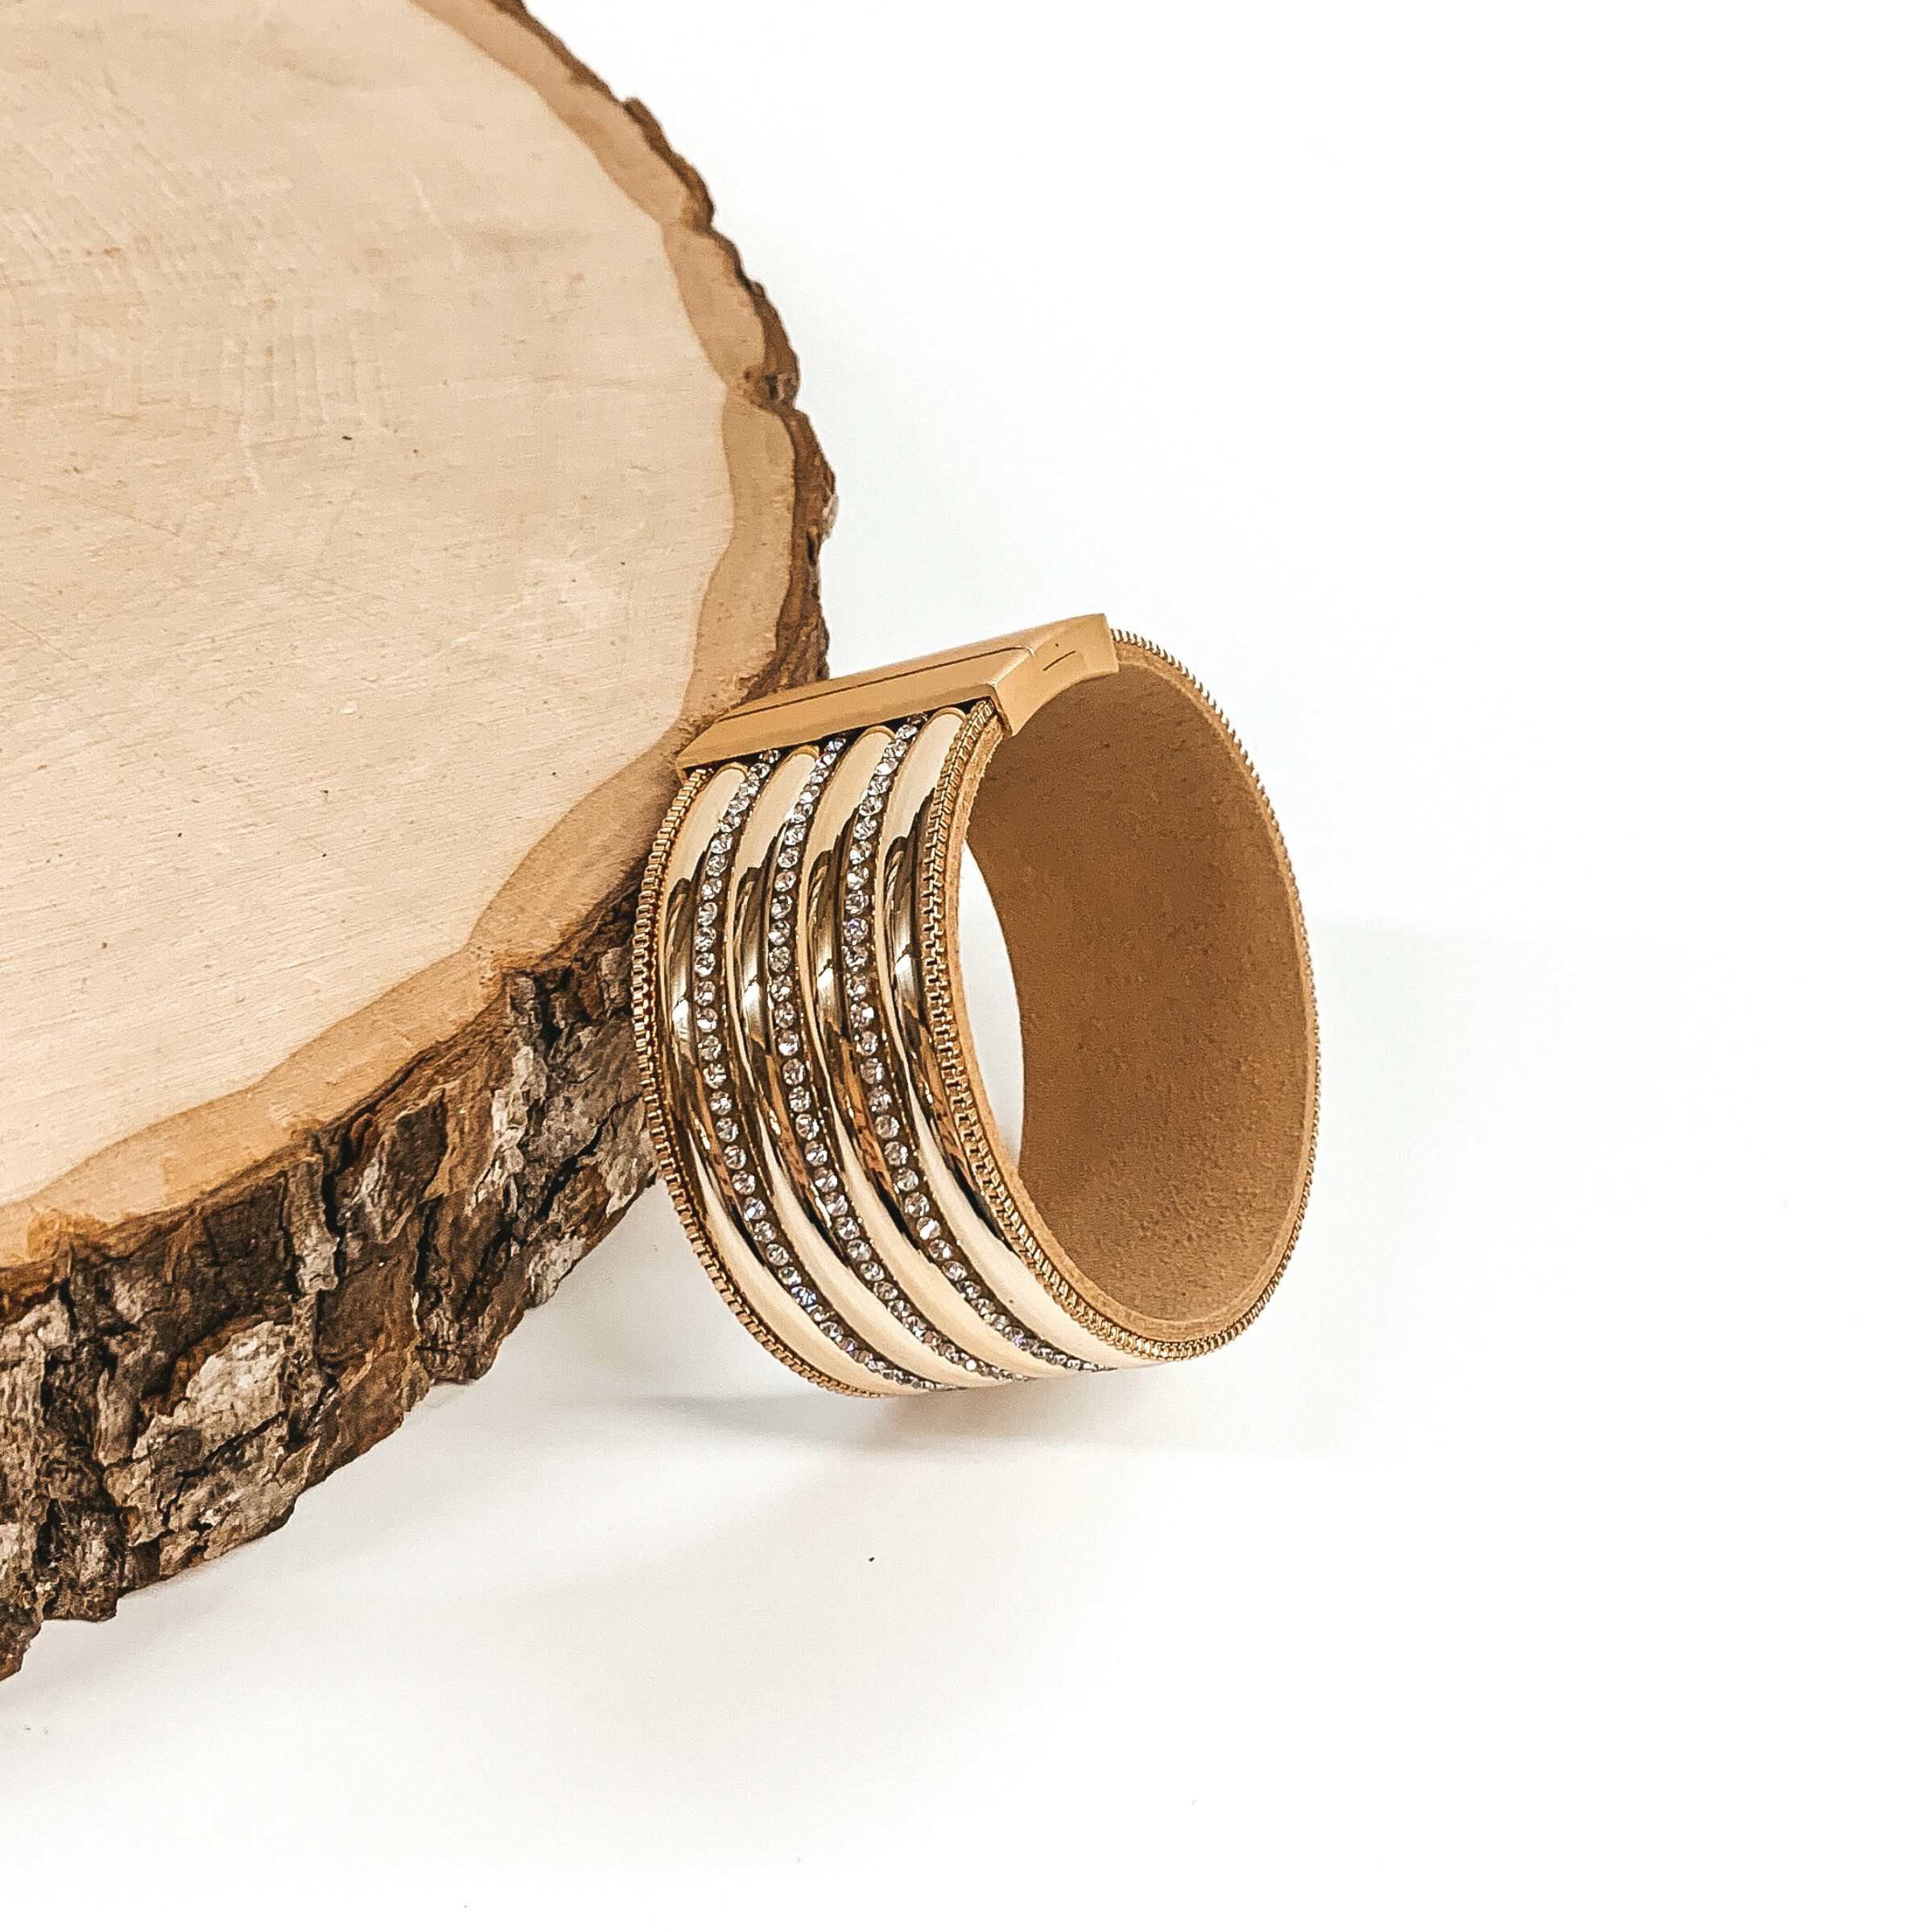 Wide band with gold colored rows separated by clear crystals. It has a gold clasp. This bracelet is pictured laying against a piece of wood on a white background.